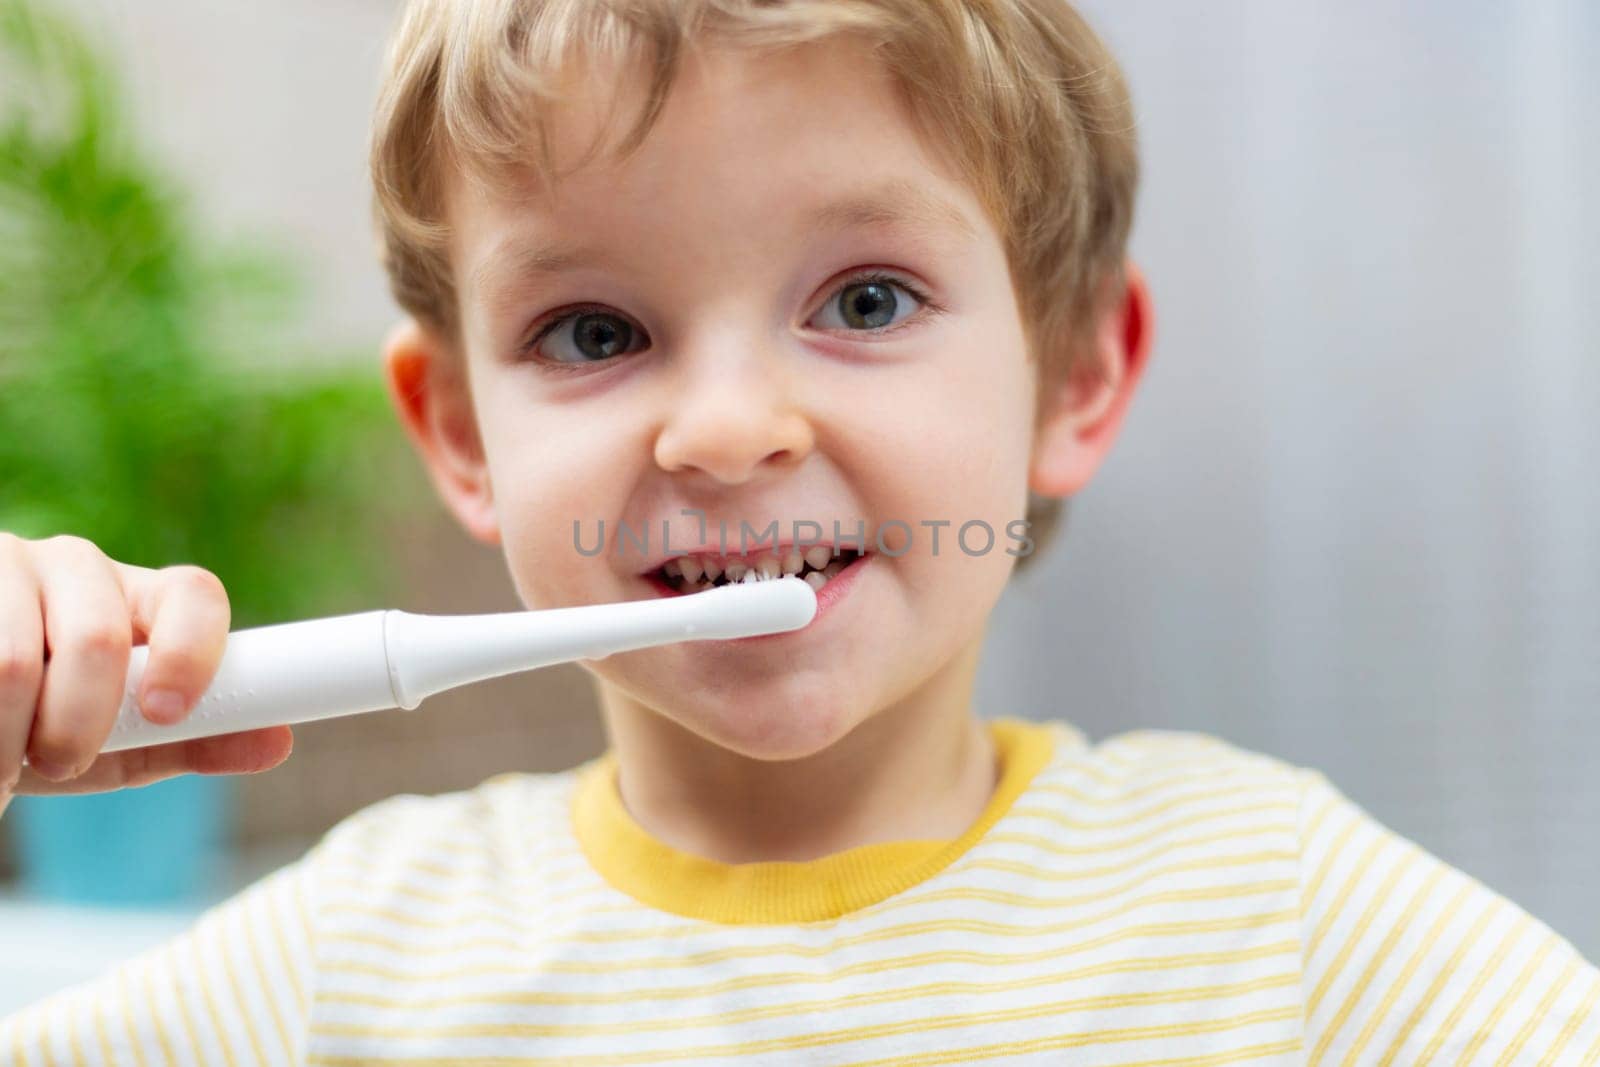 Young boy brushing teeth with electric toothbrush. Oral hygiene routine concept. Portrait with copy space for dental health educational posters and banners.